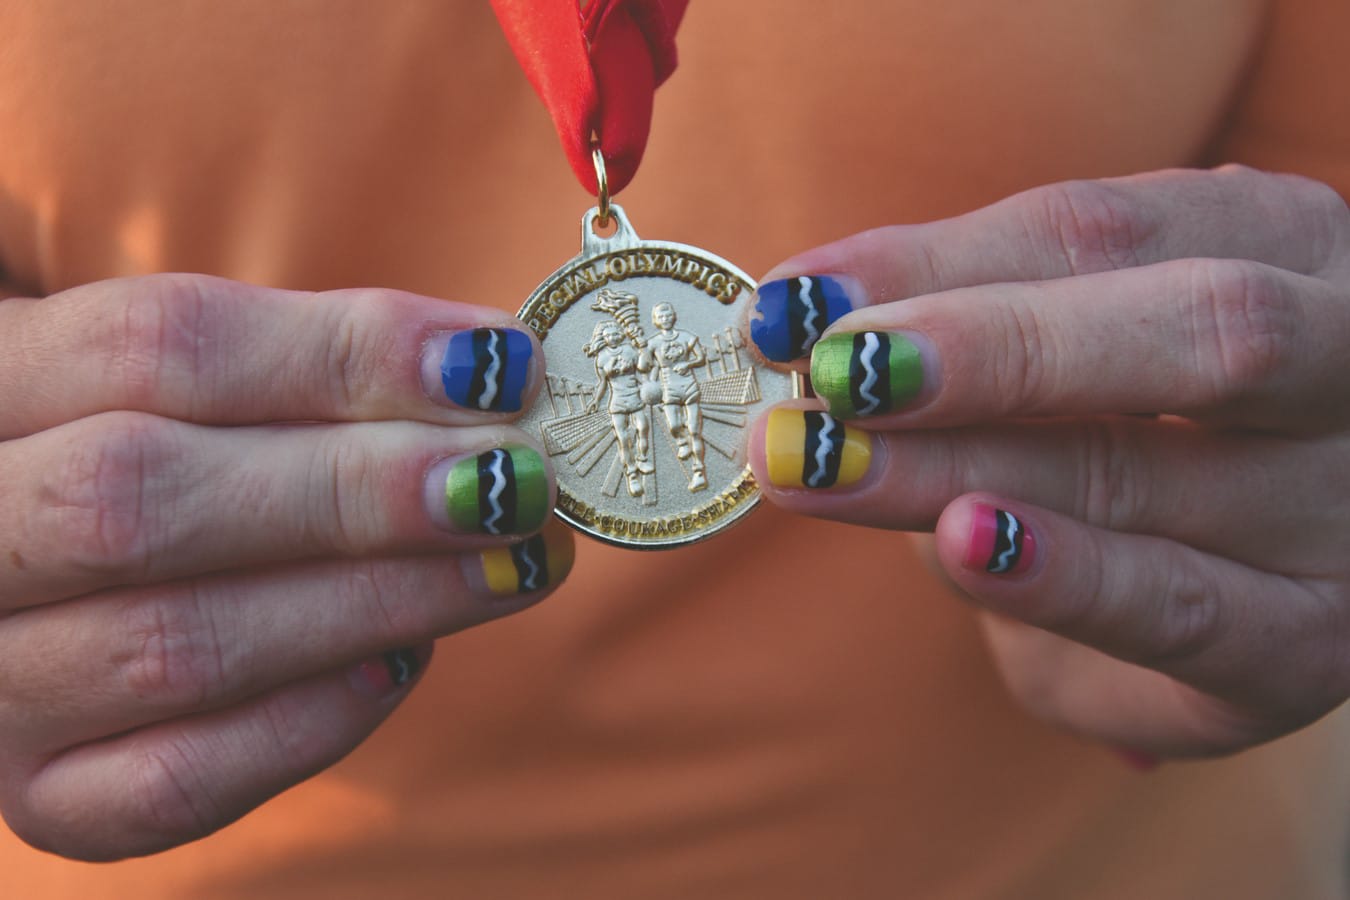 gold medal held in hands with colorful painted fingernails